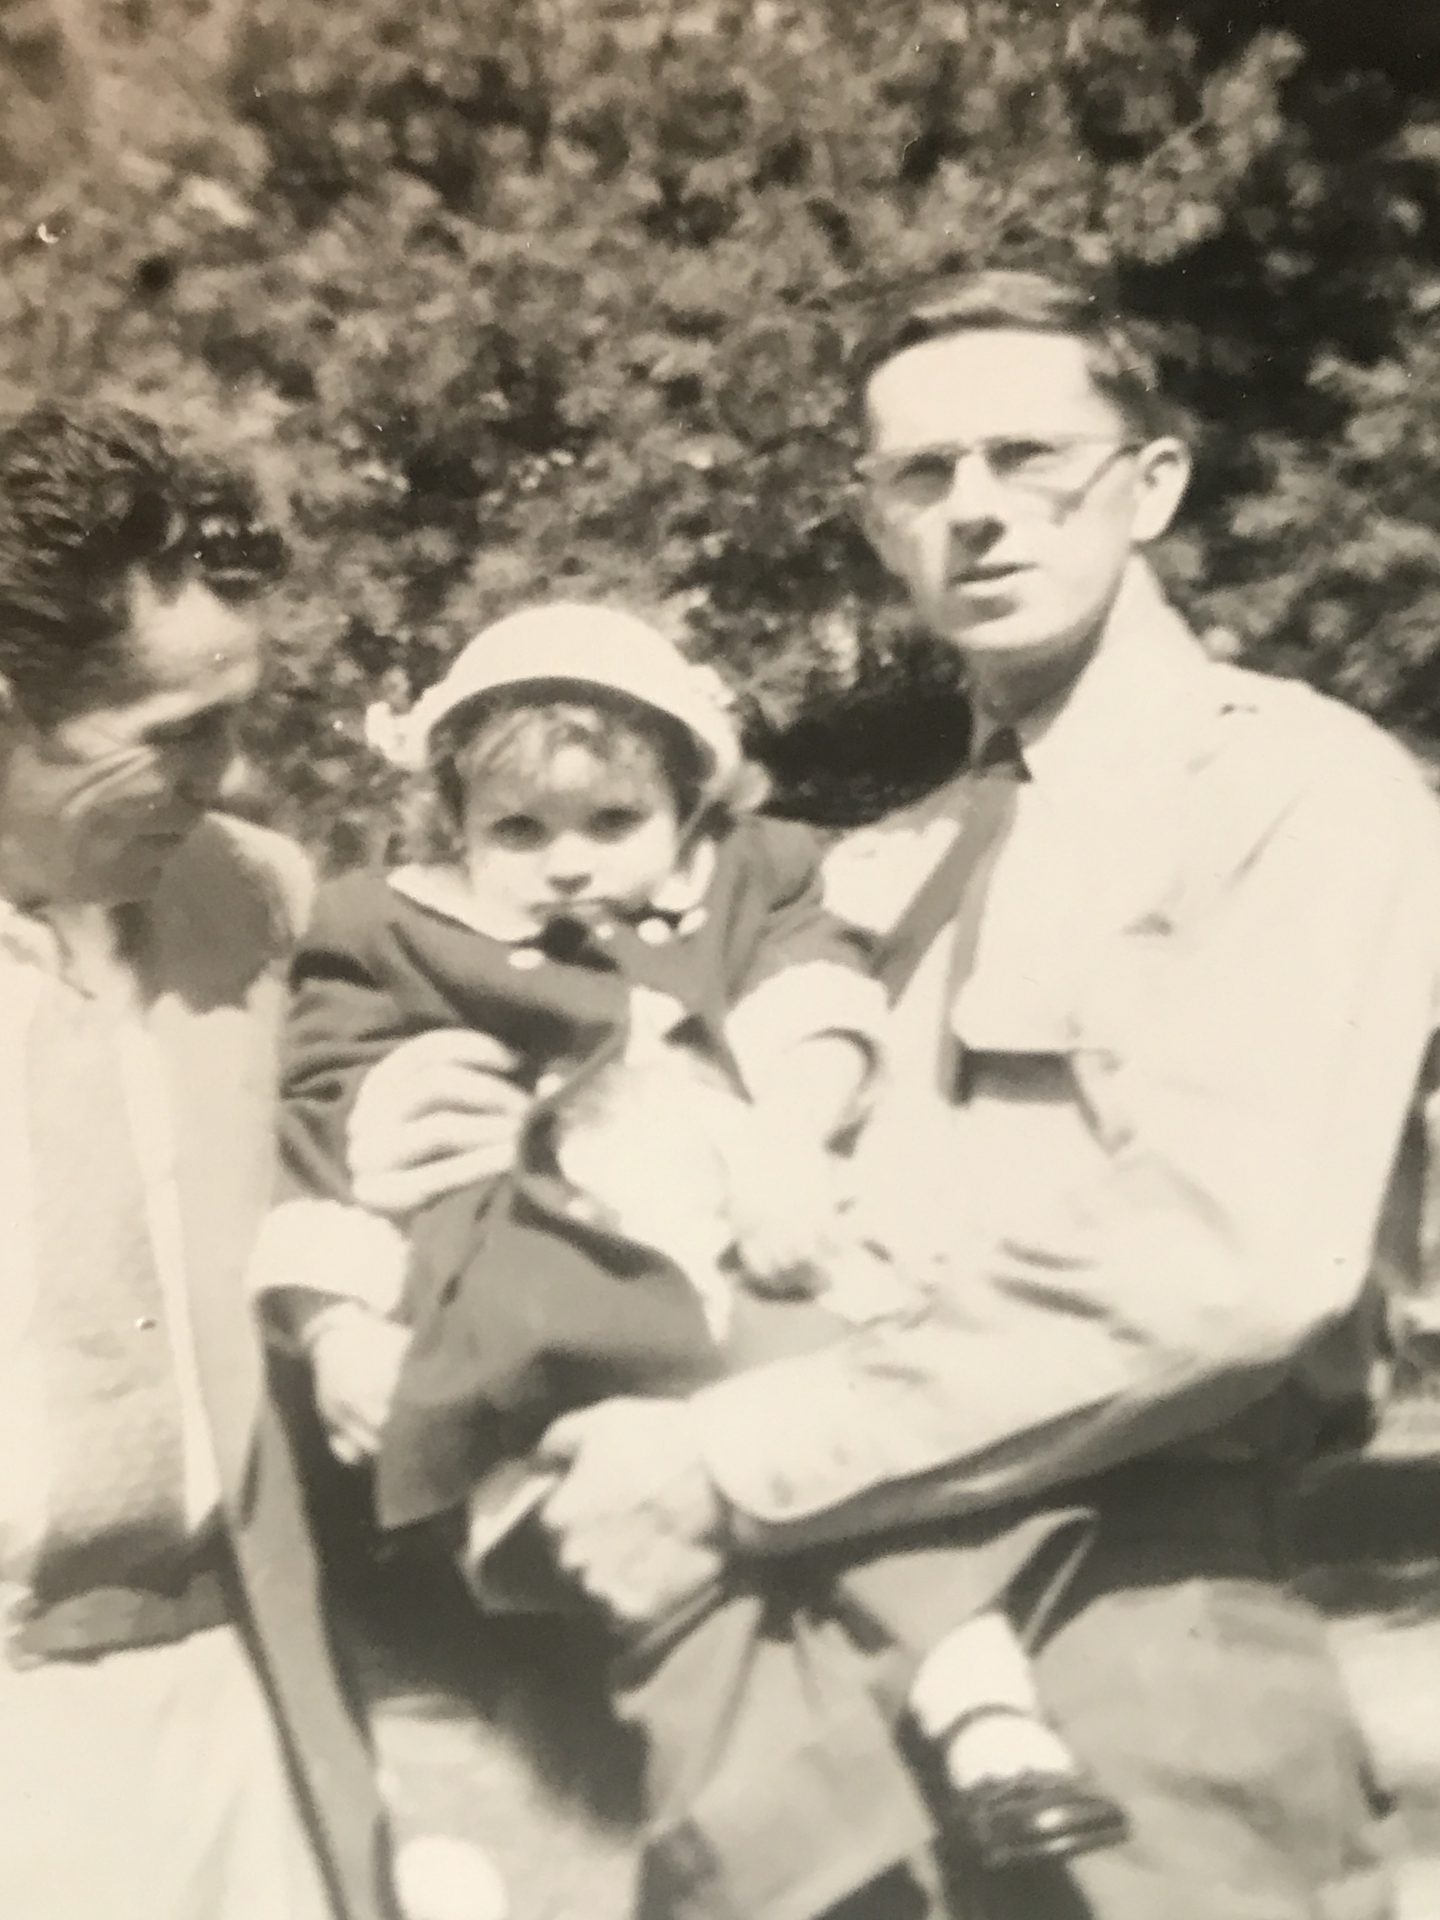 My beautiful Godfather/Uncle,<br />
Richard holding me,Robbie (Roberta)1954 with Rodney.